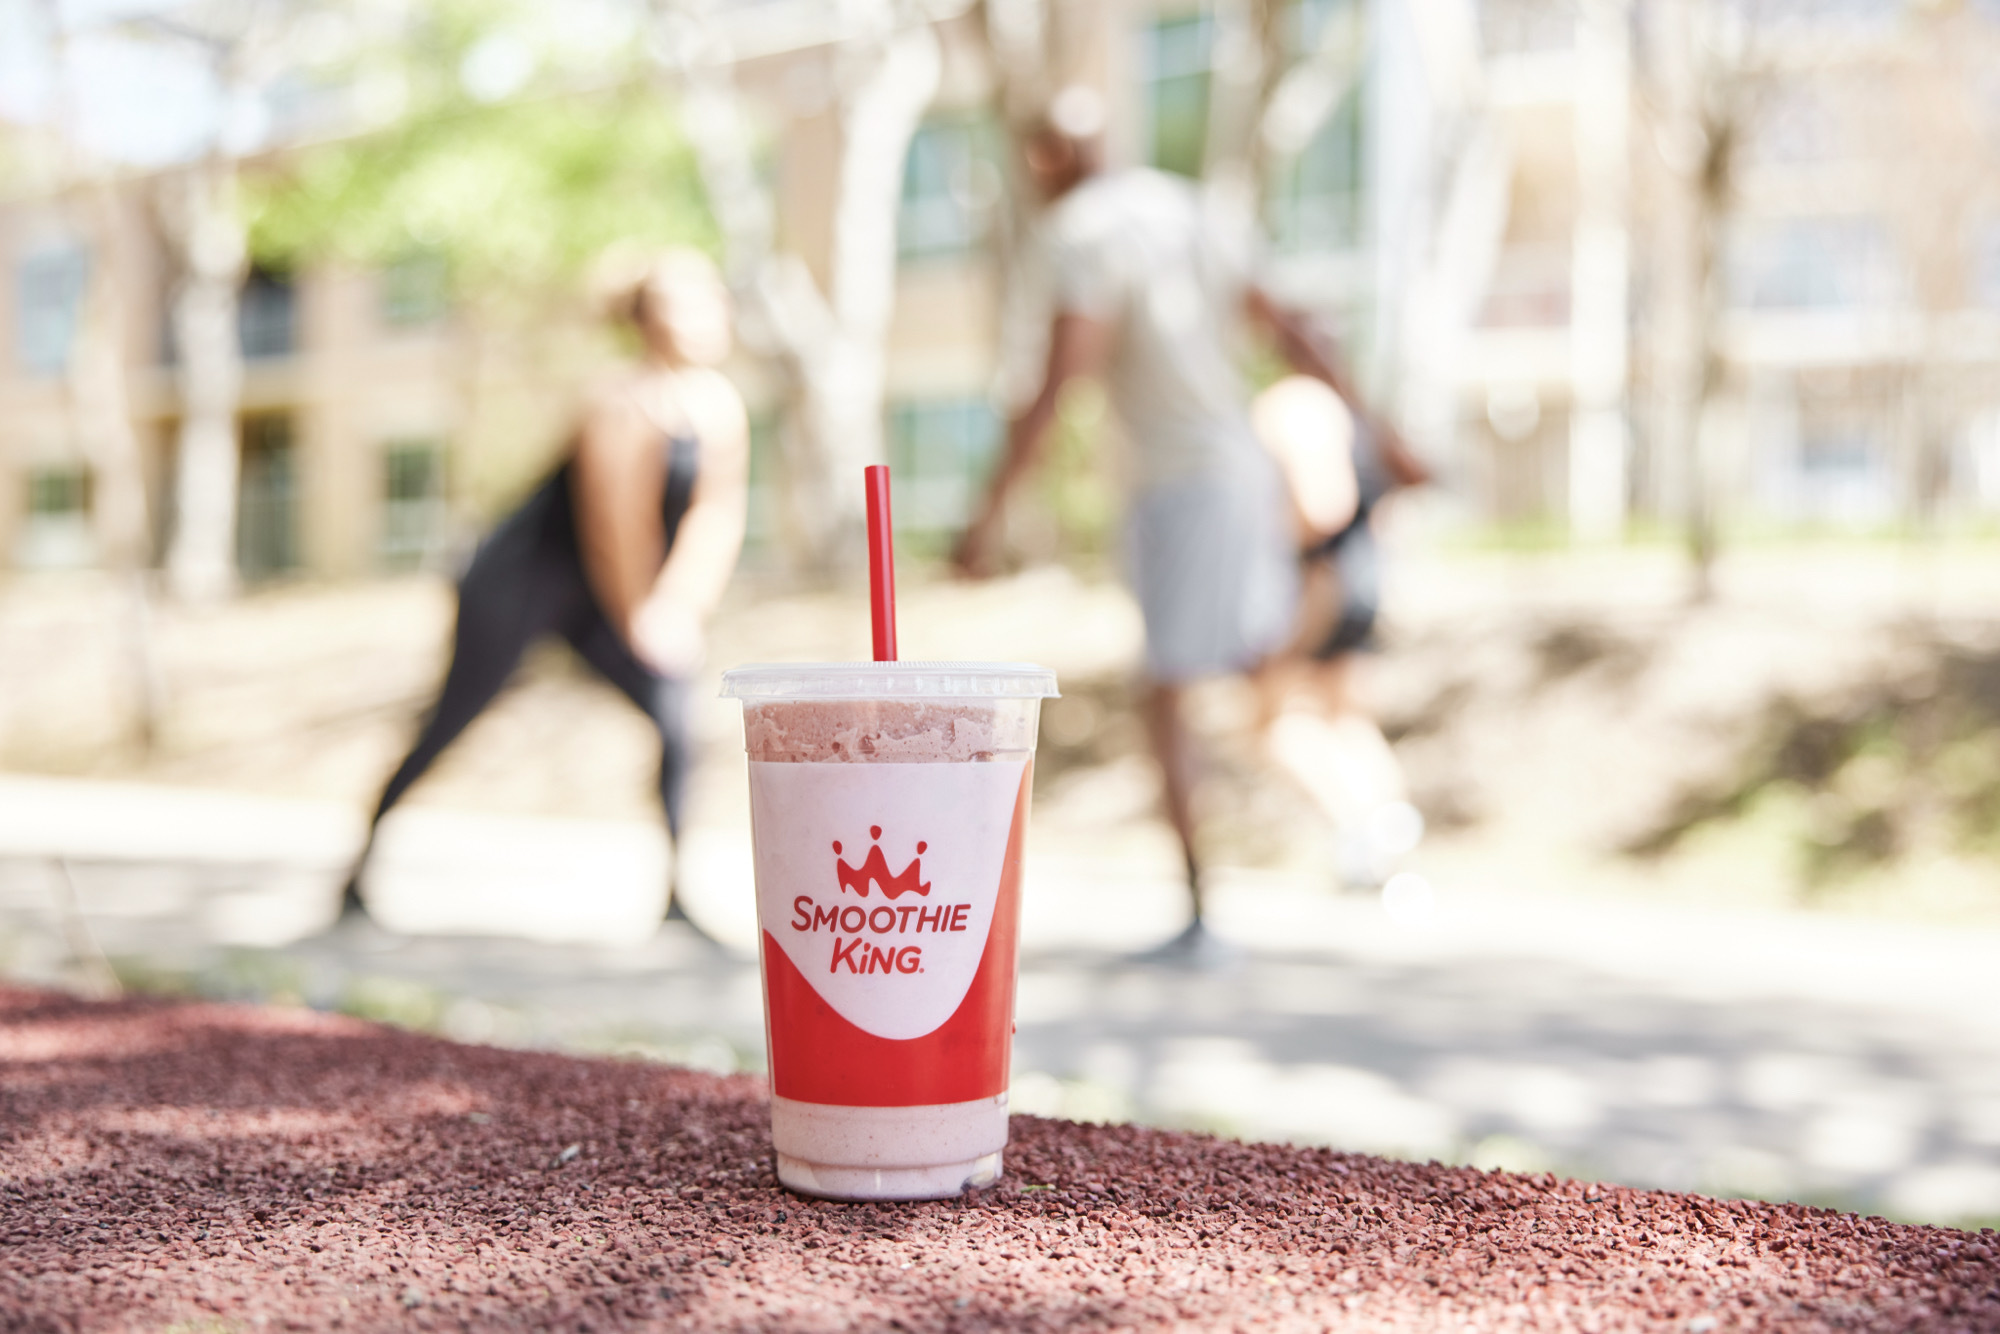 Man and woman stretching for a run with a Smoothie King smoothie cup in the foreground